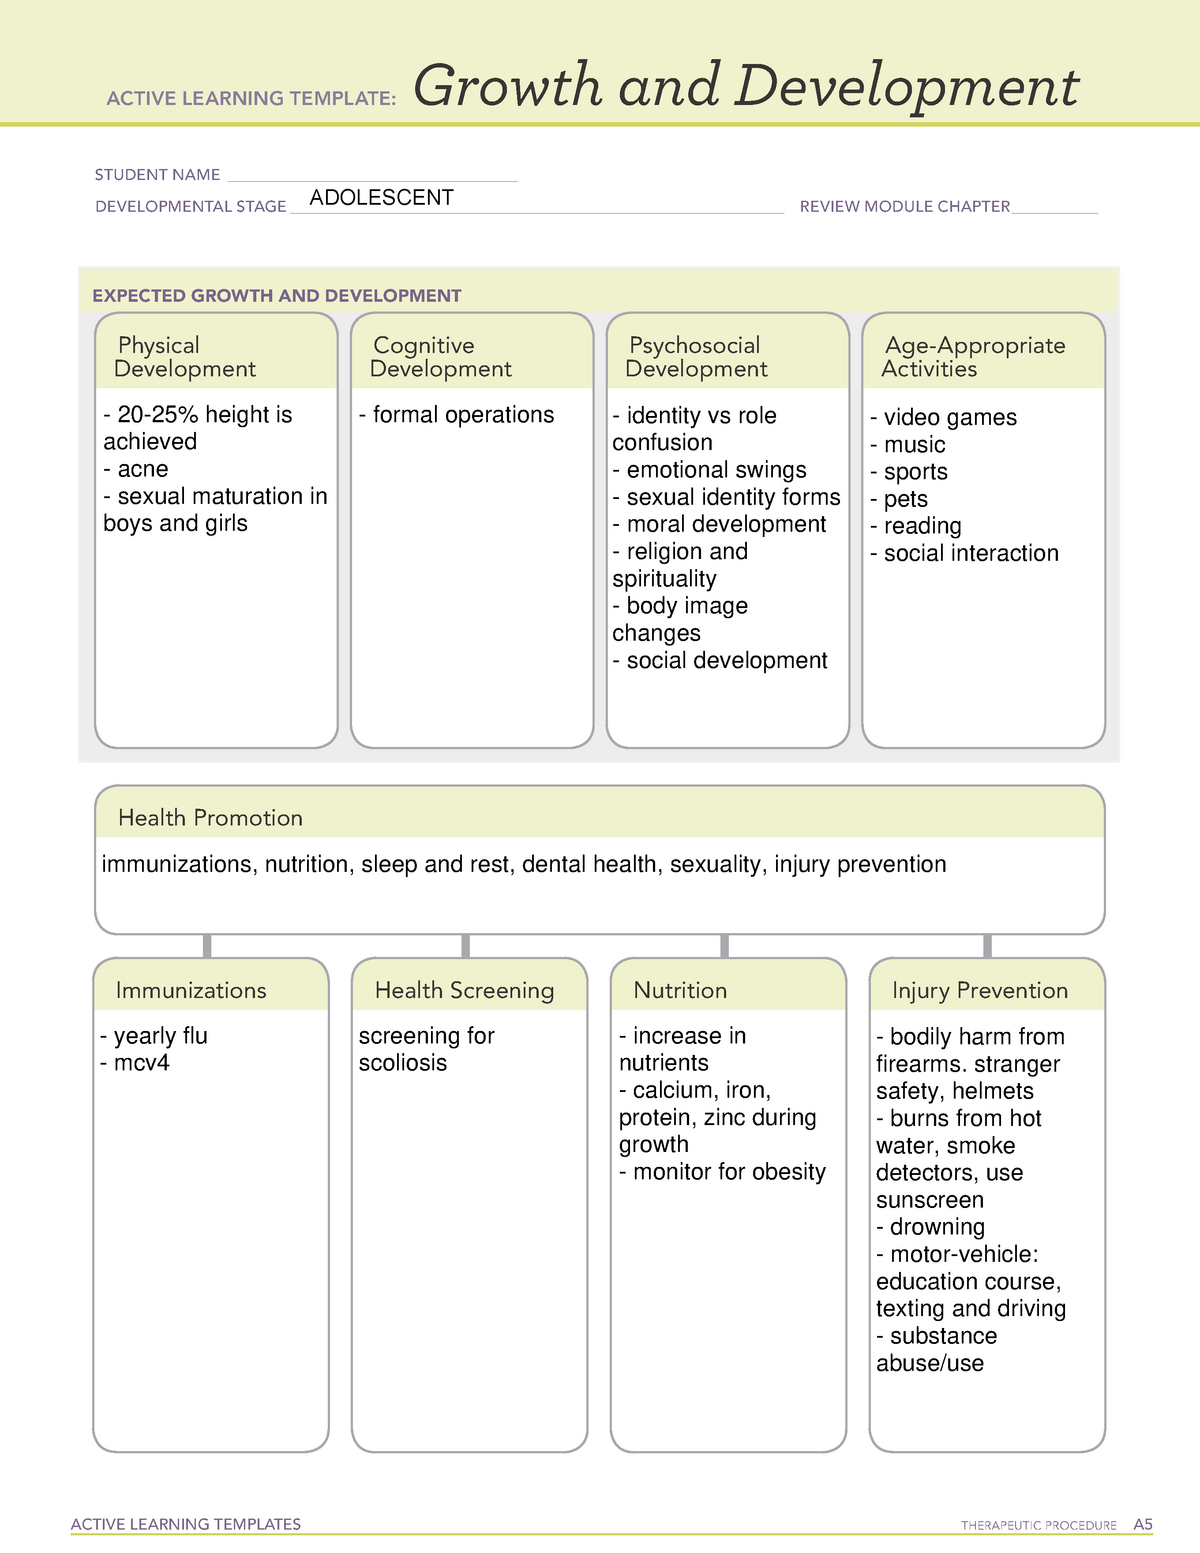 Adolescent Growth and development ATI Template ACTIVE LEARNING